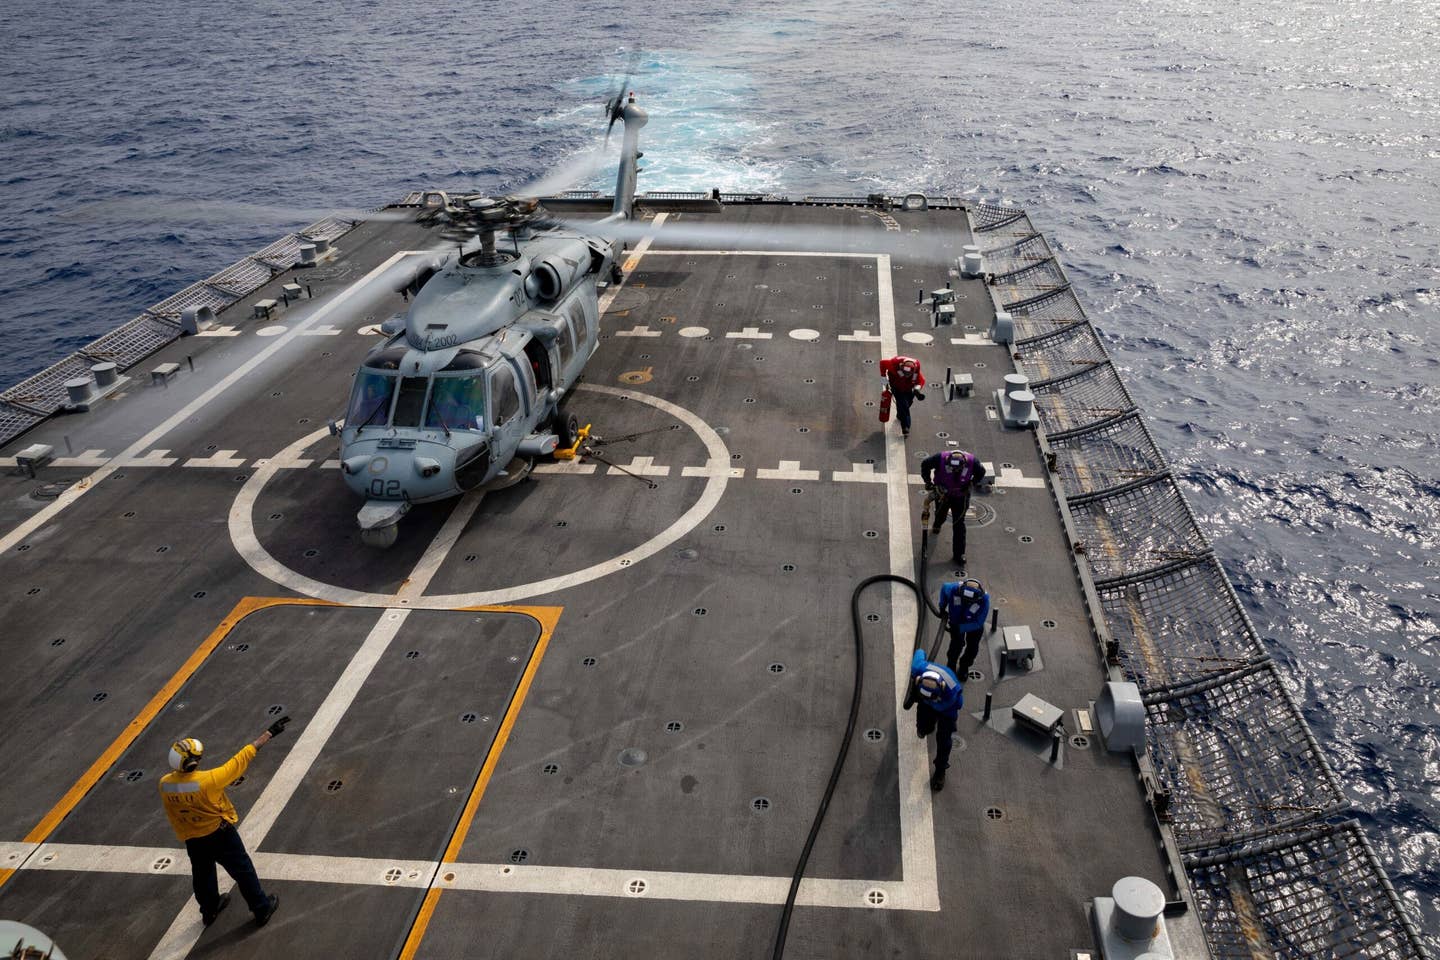 An MH-60S Seahawk helicopter from HSC-22 aboard USS Sioux City during a deployment in 2021. <em>U.S. Navy photo by Mass Communication Specialist 2nd Class Marianne Guemo/Released</em>